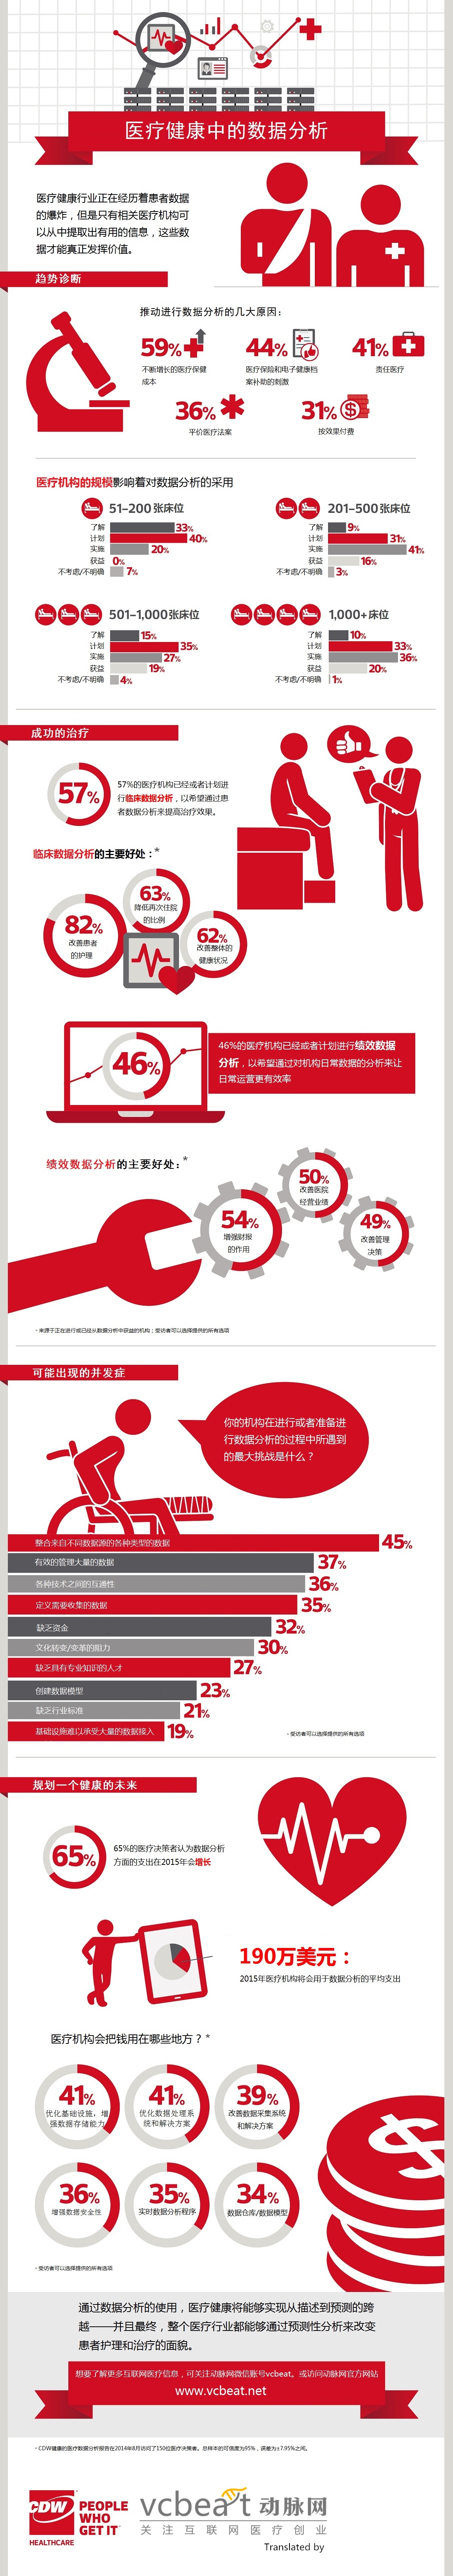 CDW-Healthcare_Analytics-in-Healthcare-Infogra - 副本 - 副本 (2)_副本